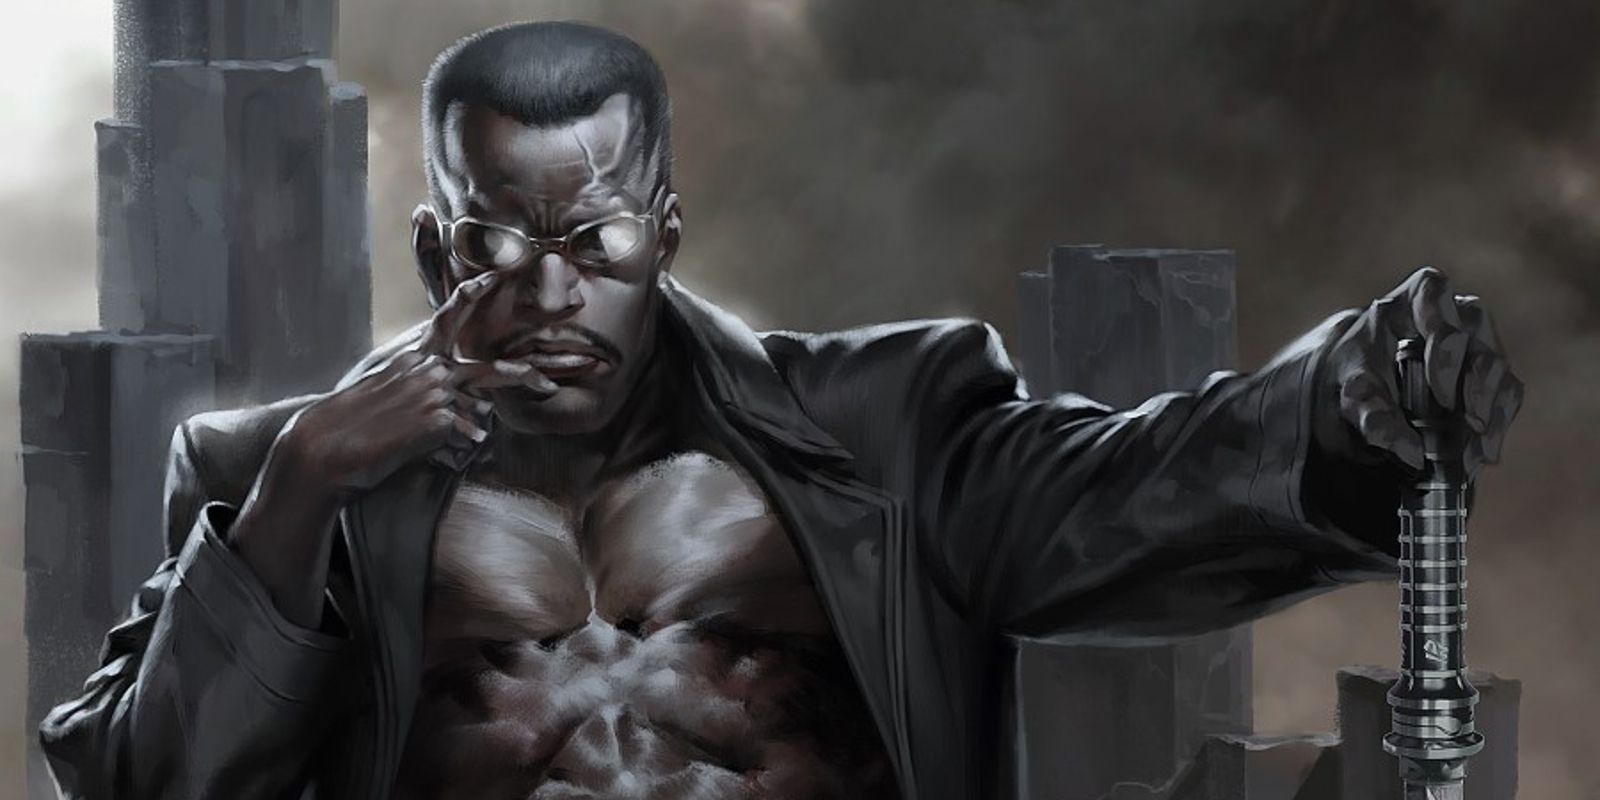 Blade sitting on a throne in Marvel comics